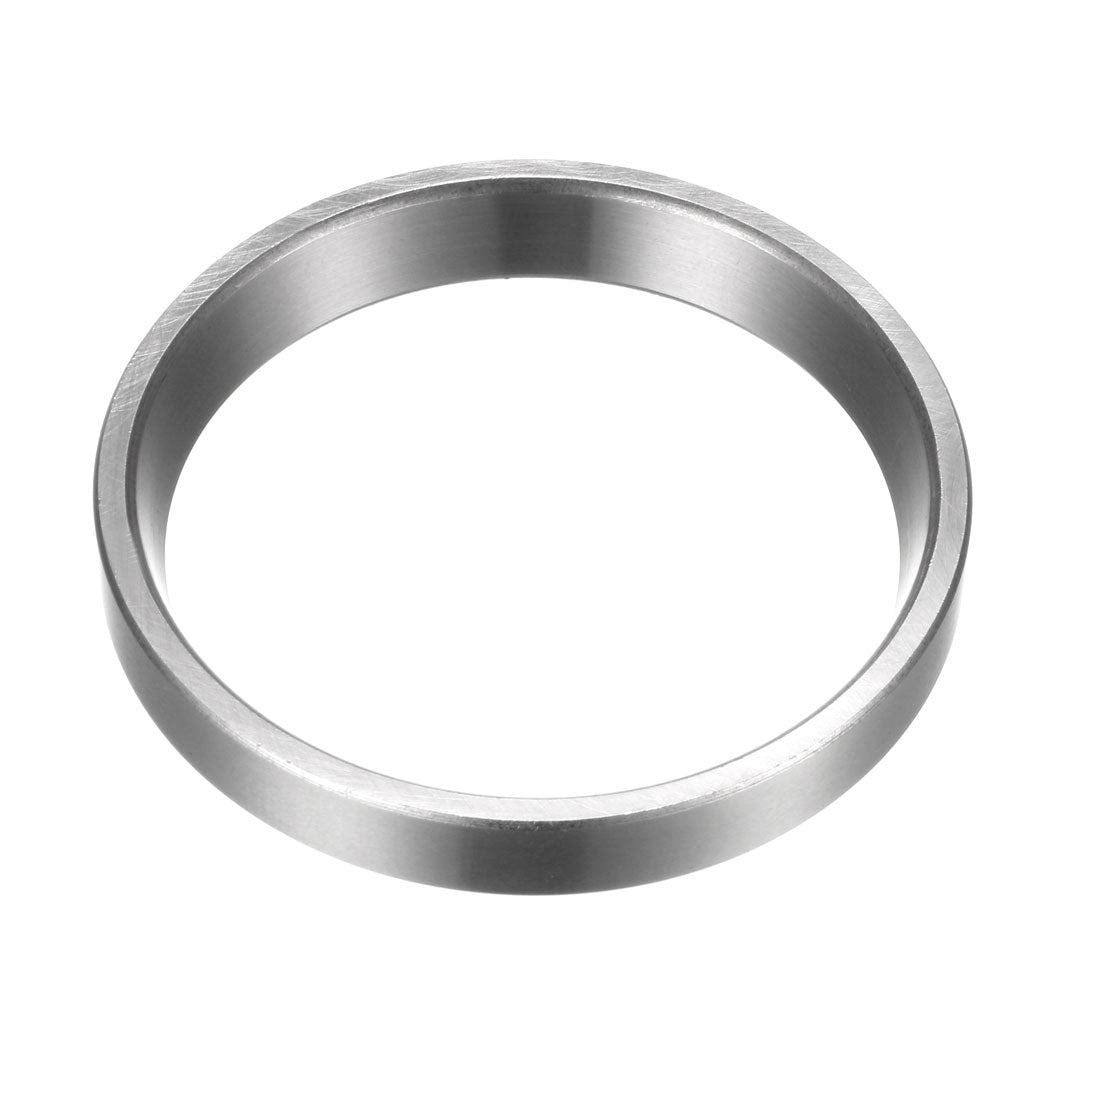 Uxcell Uxcell 13836 Tapered Roller Bearing Outer Race Cup 2.5625" O.D., 0.375" Width